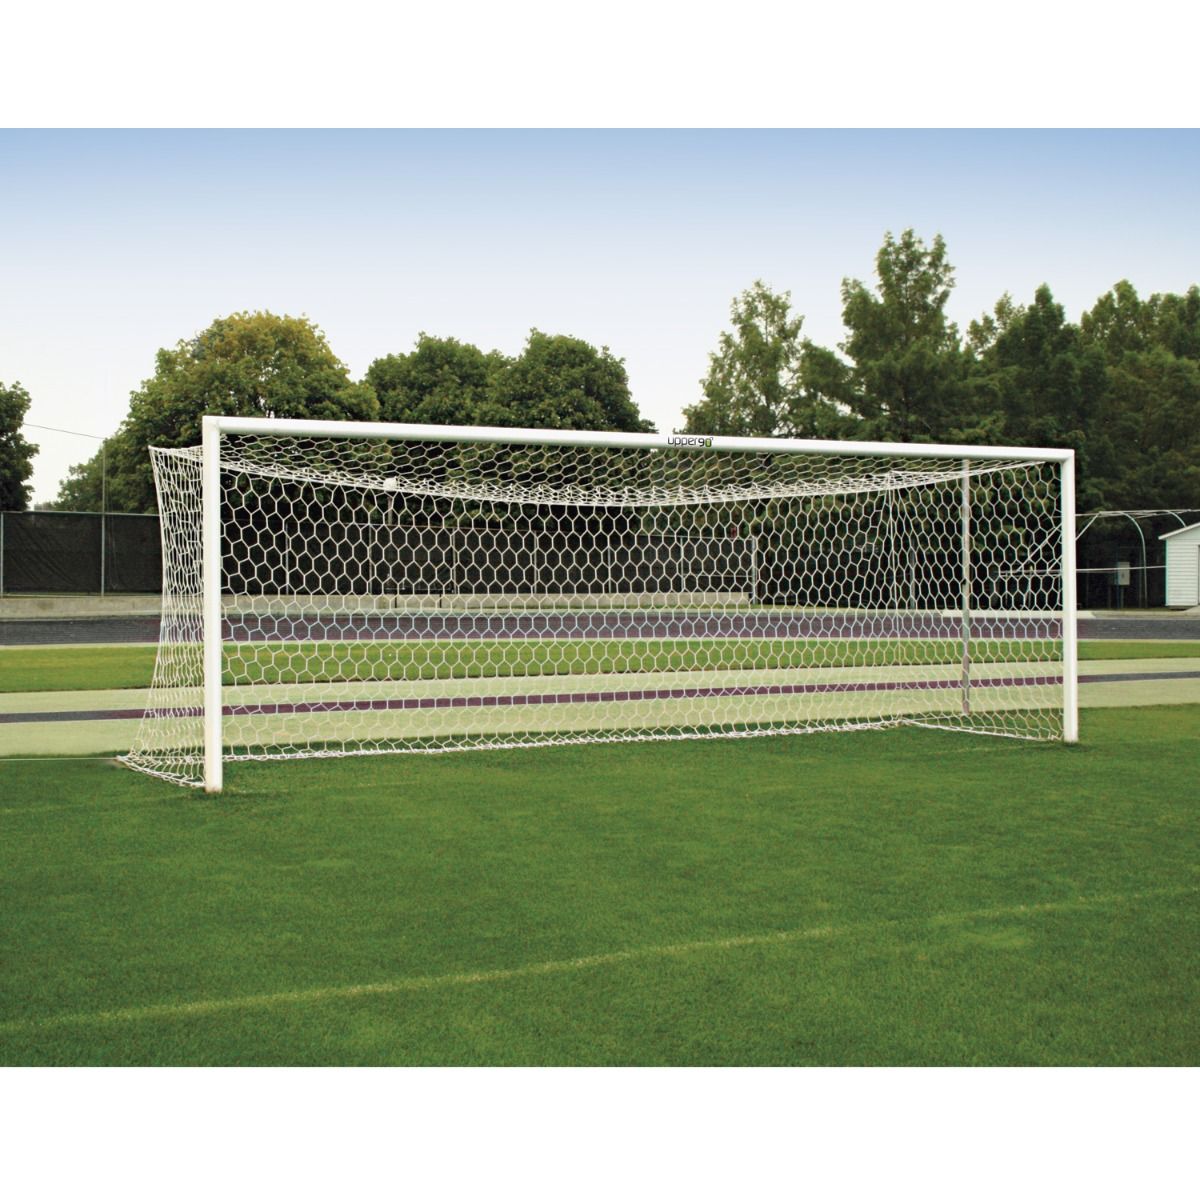 U90 WORLD CUP SOCCER GOAL PACKAGE